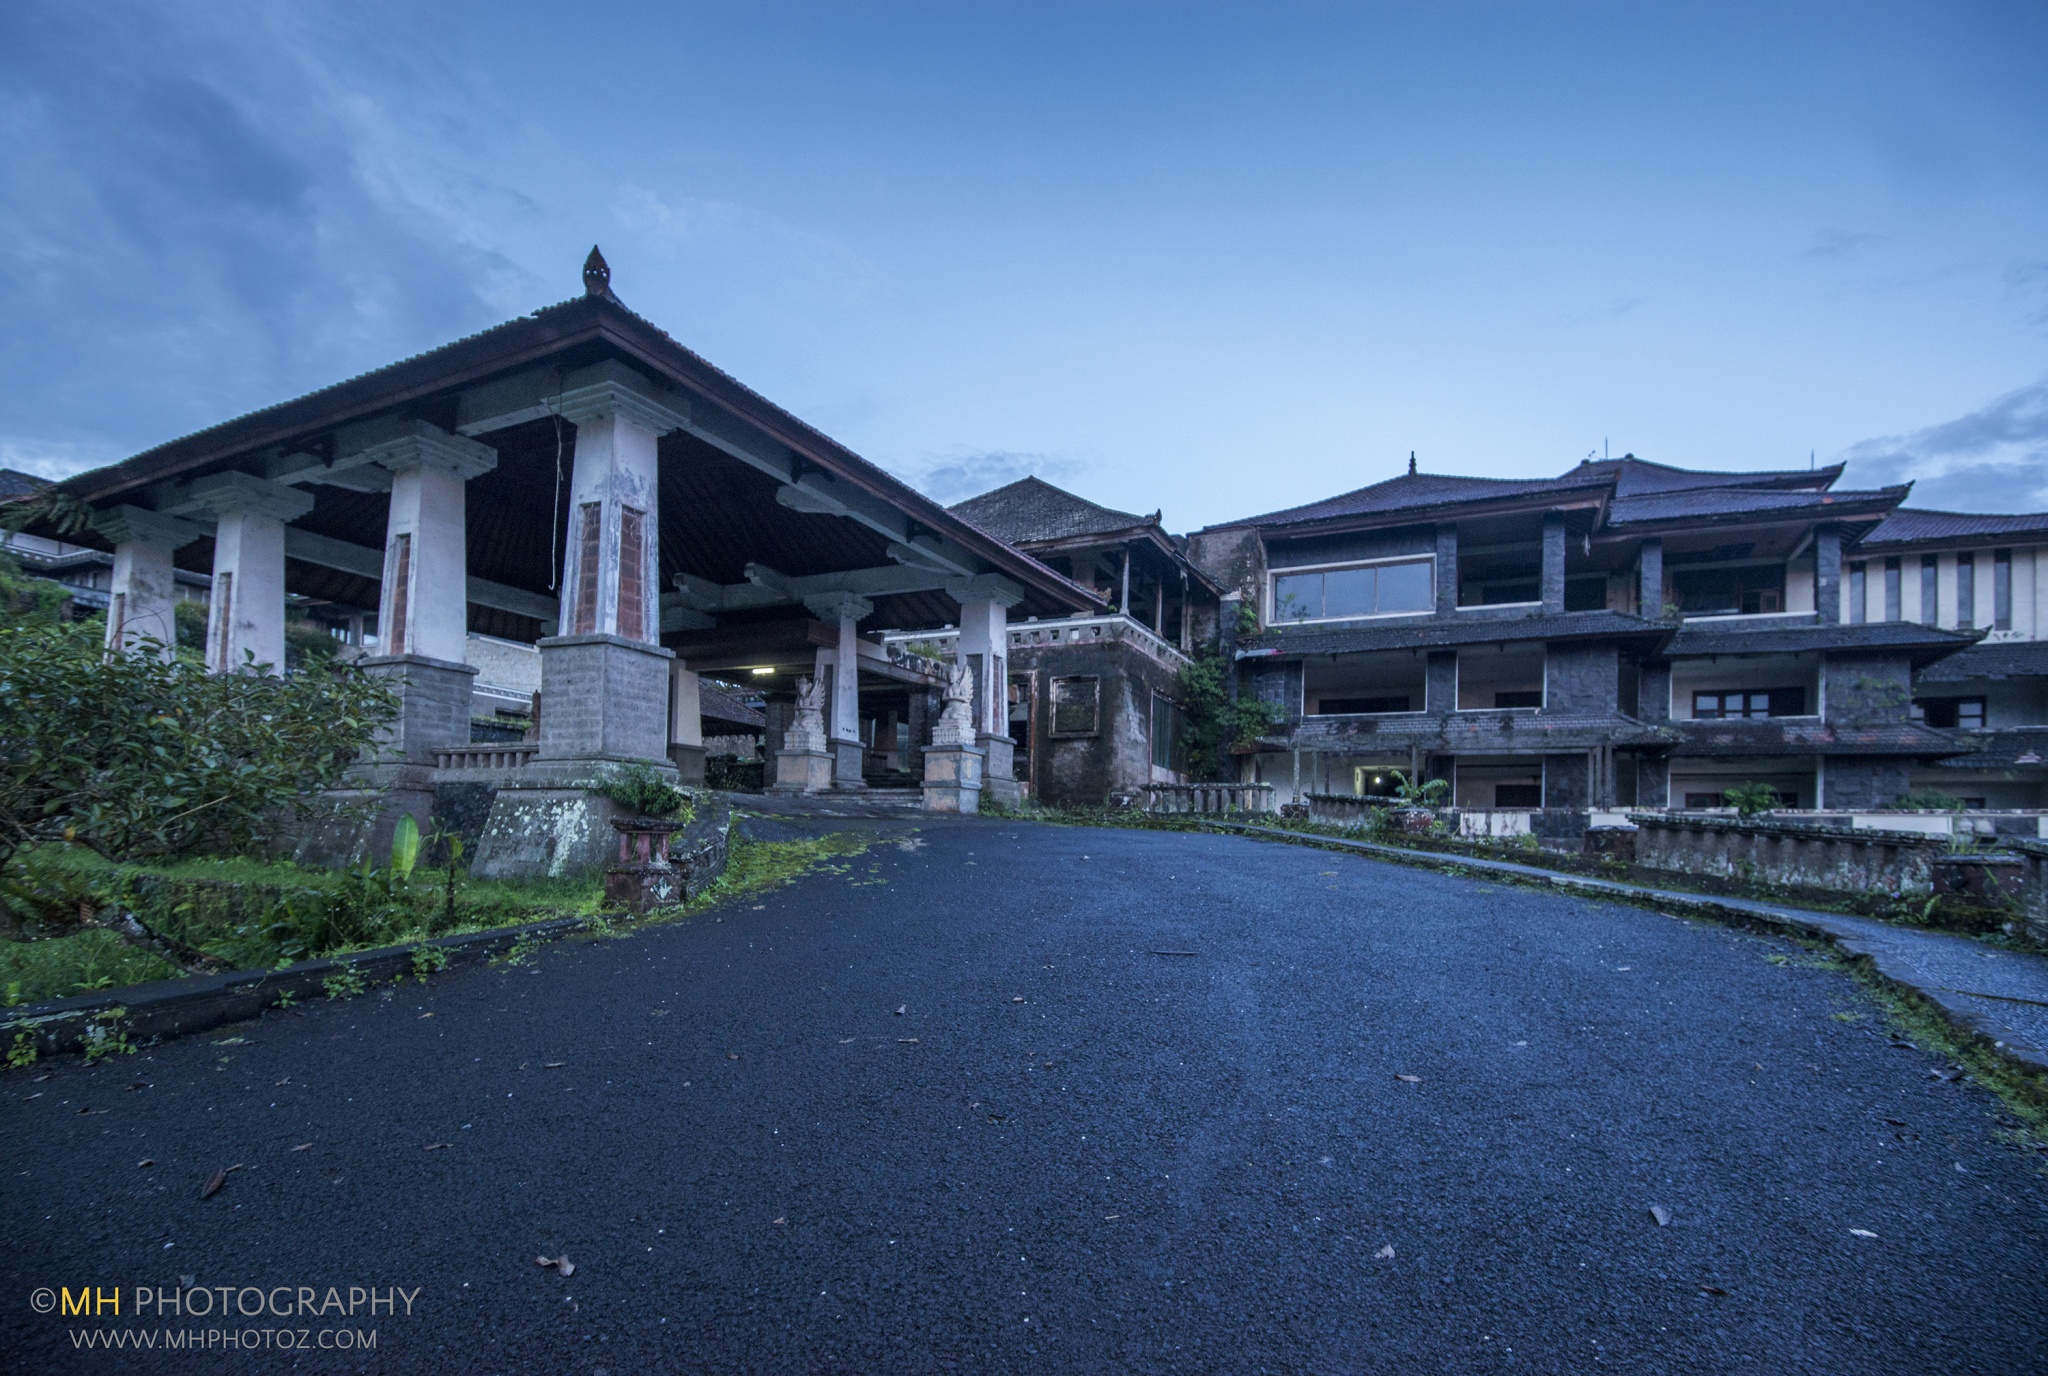 Abandoned Hotel in Bali - The Ghost Palace Hotel